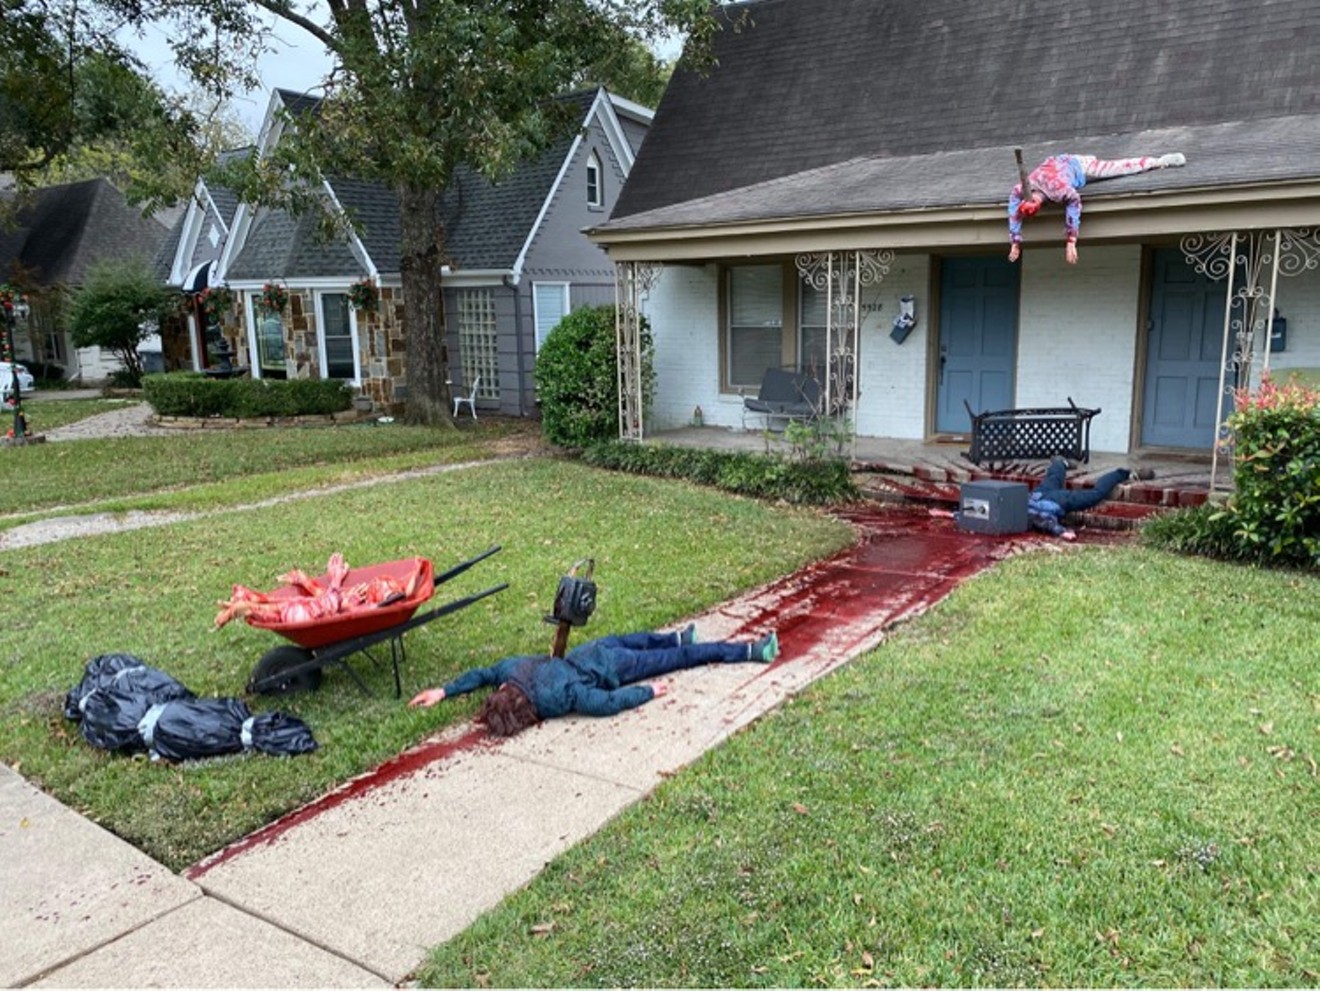 Steven Novak's crime scene Halloween decorations are so realistic that neighbors are calling the police to investigate.